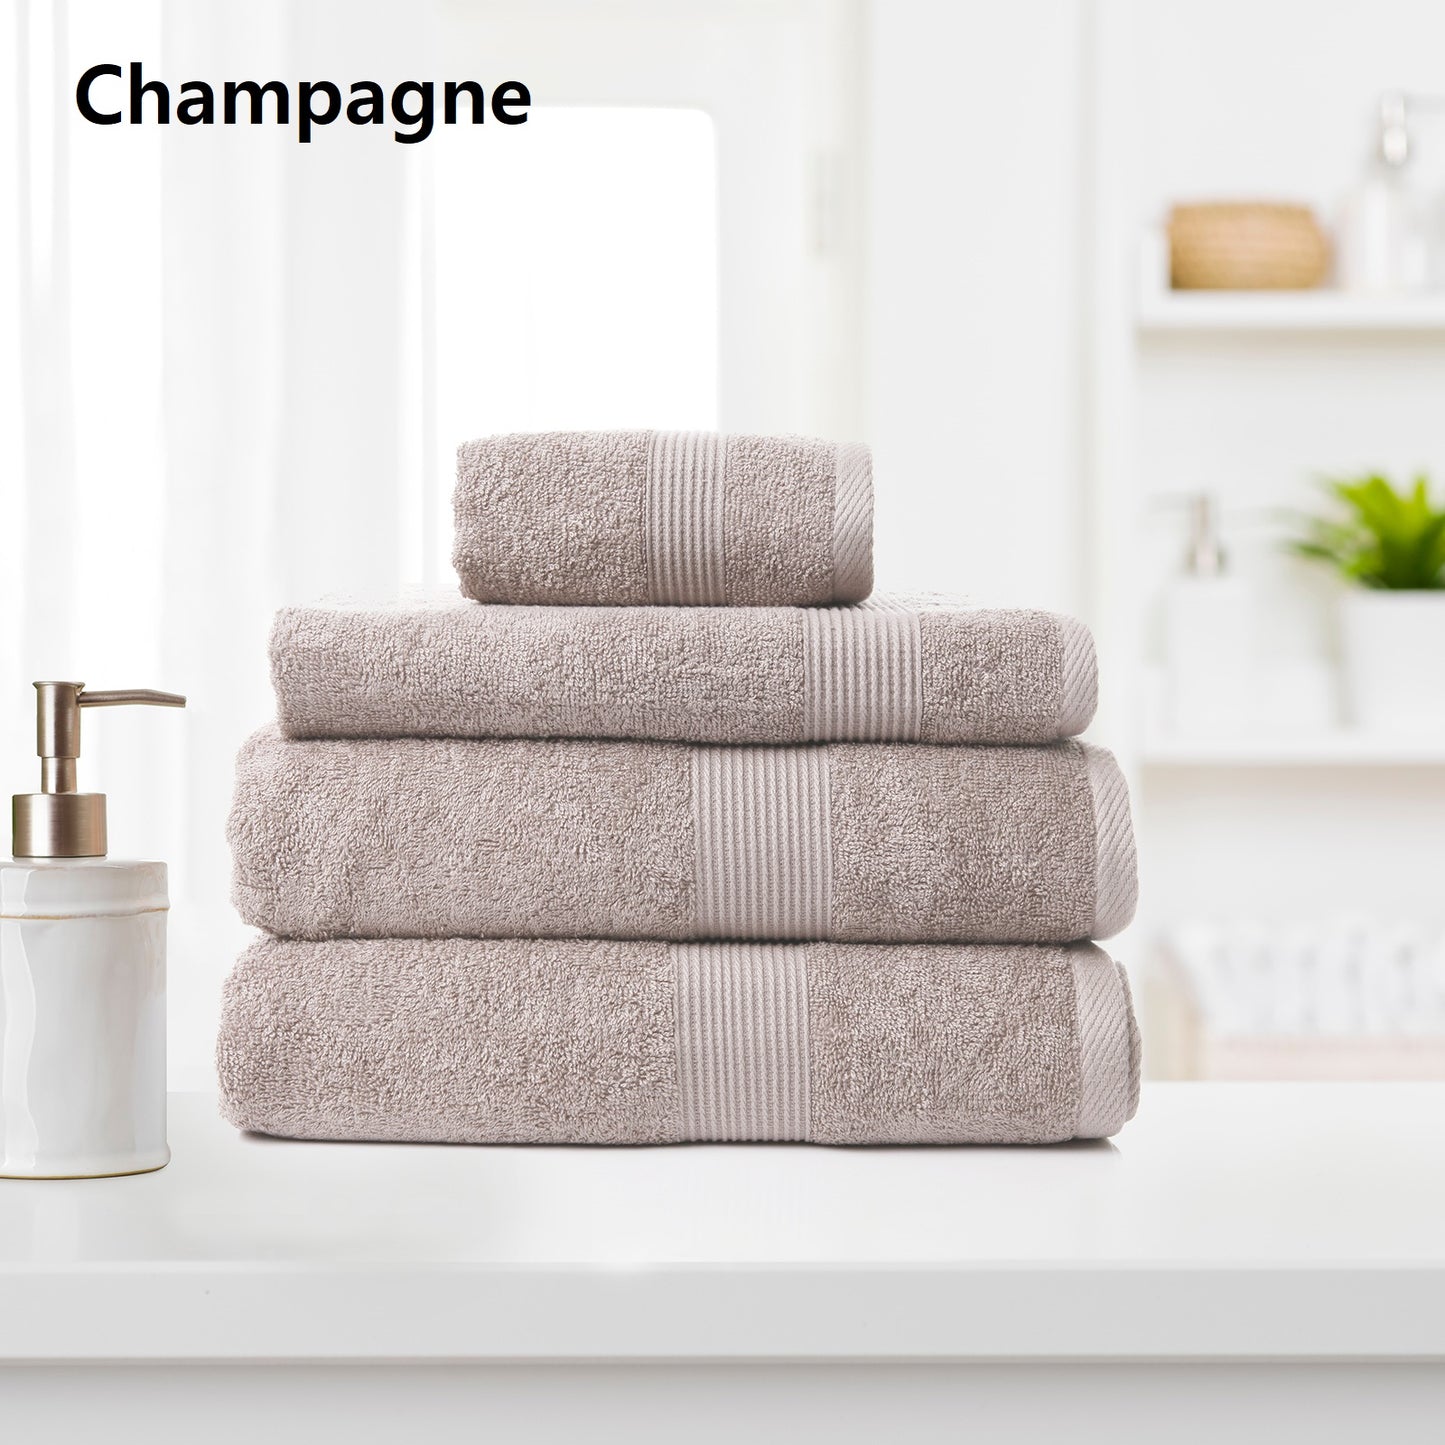 Cotton Bamboo Towel 4-Piece Set Champagne